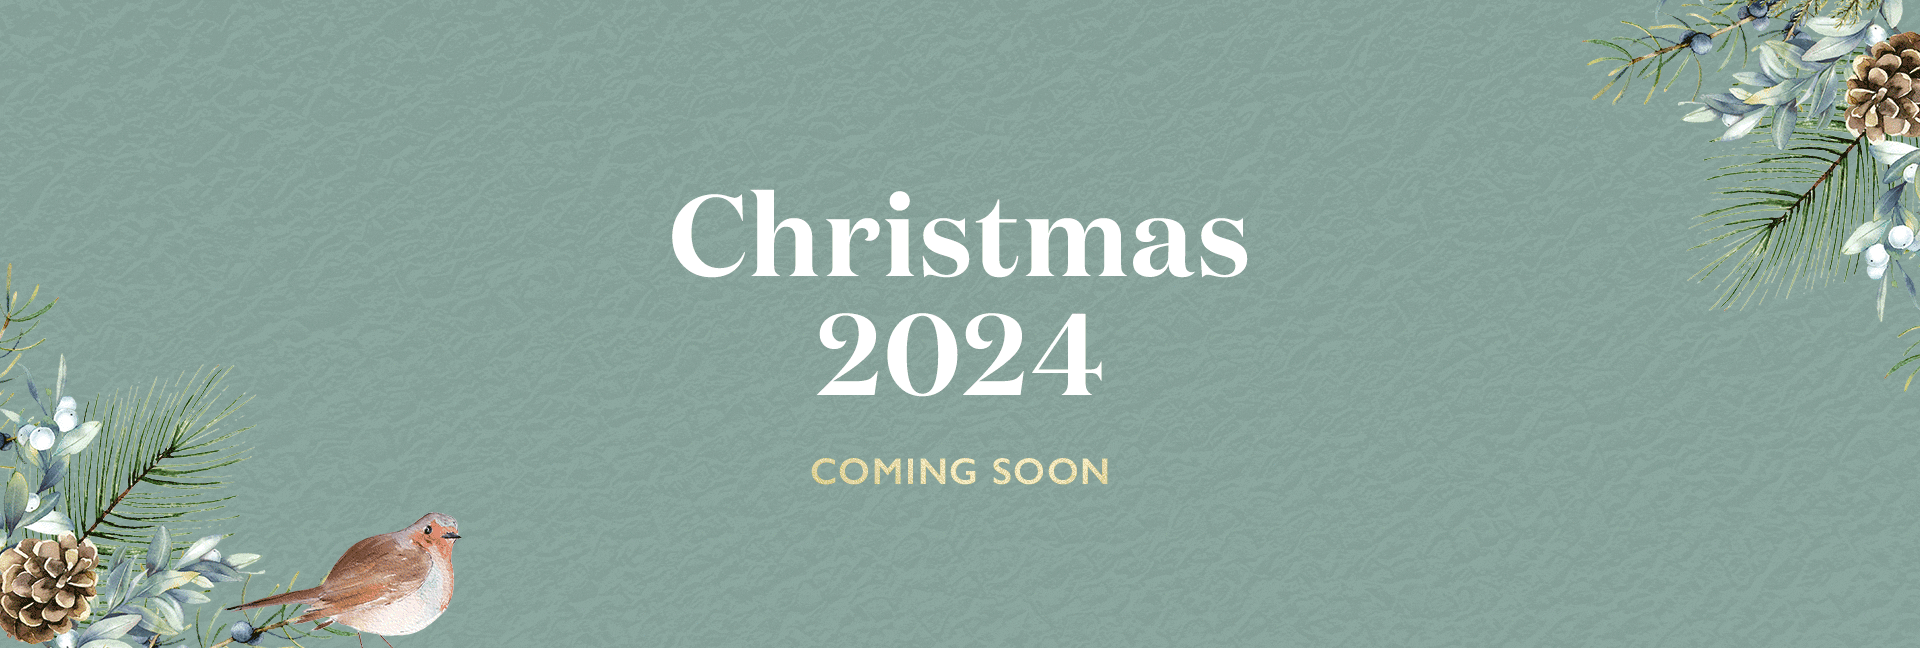 Join Us for Christmas 2024 in Welwyn Garden City The Crooked Chimney